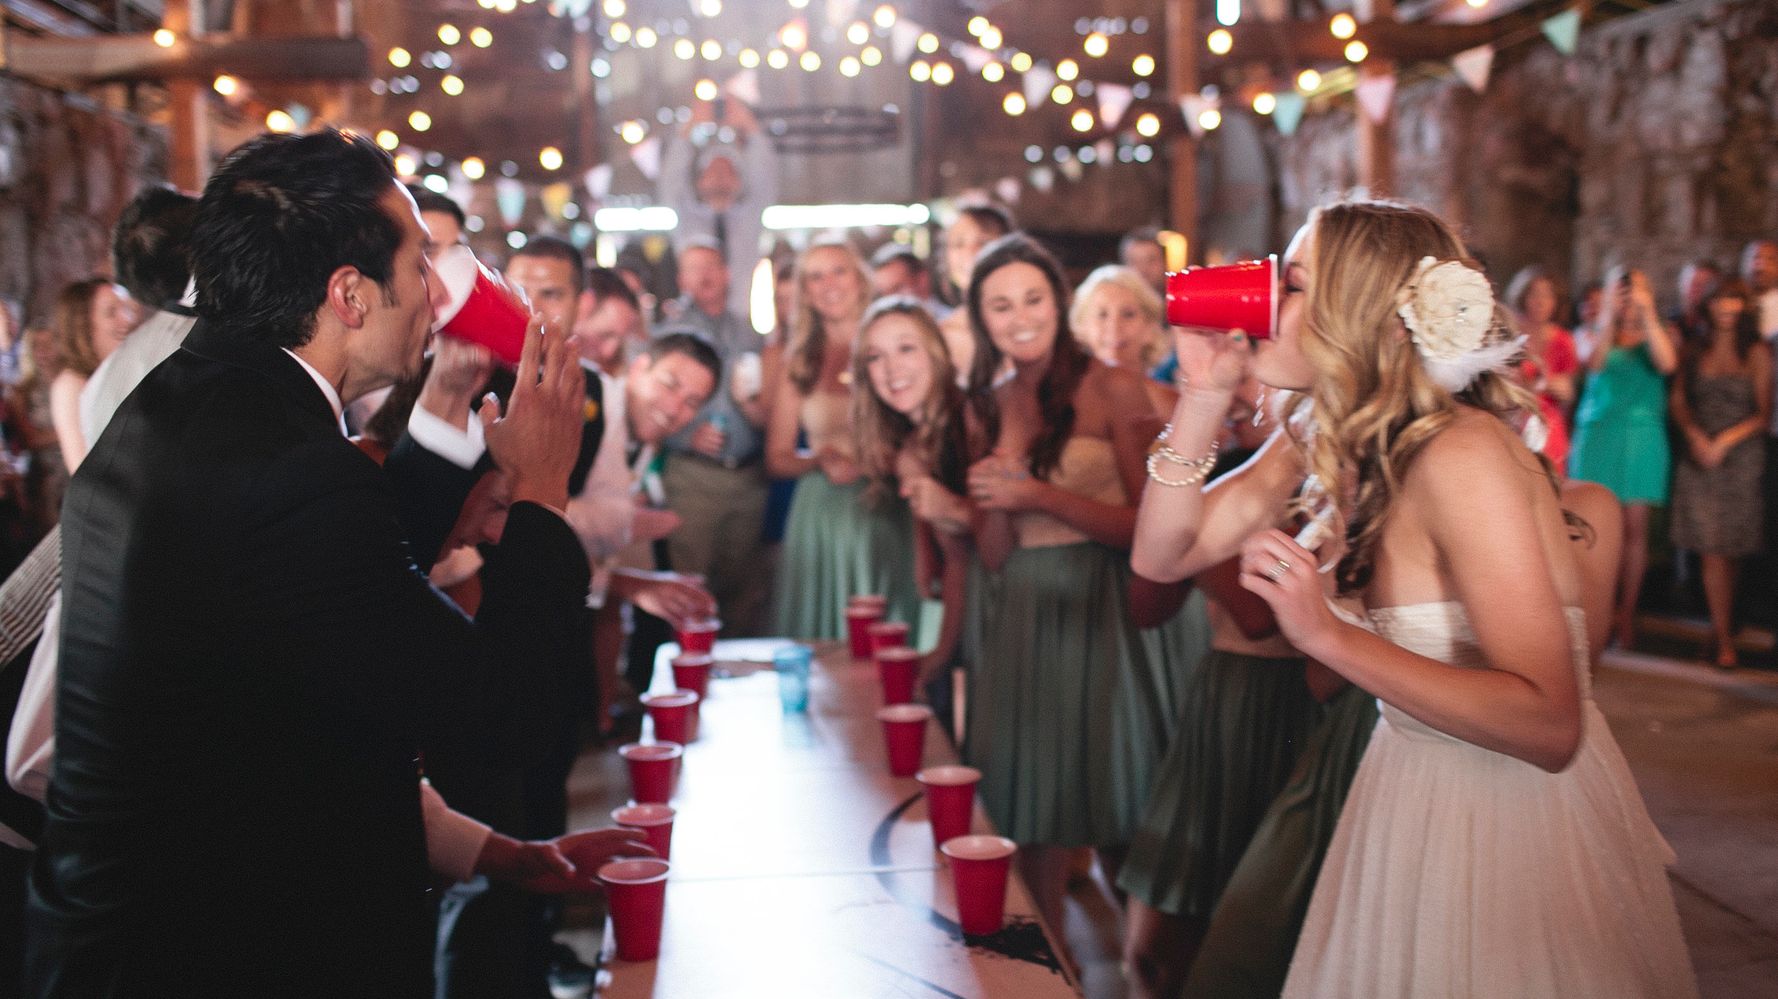 21 Awesome Wedding Games That Will Keep The Party Going | HuffPost Life